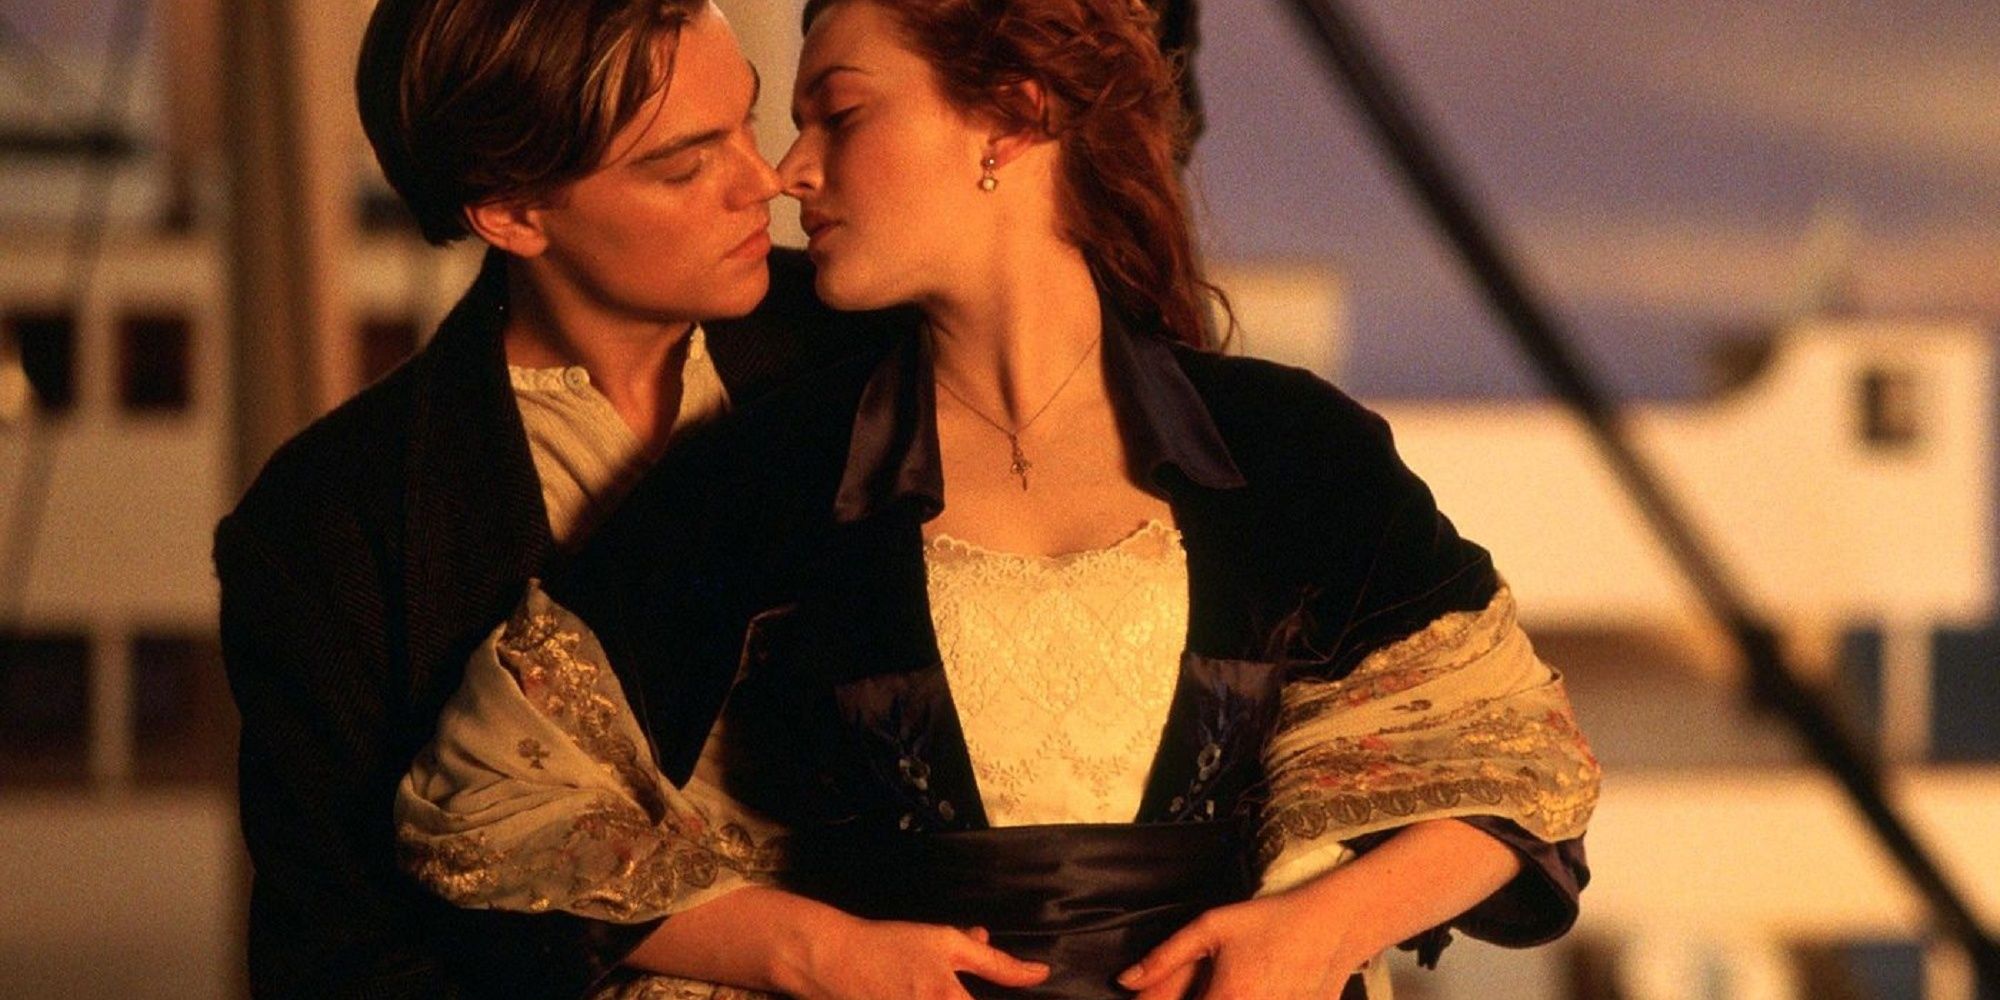 Jack and Rose kissing at the front of the ship in Titanic.